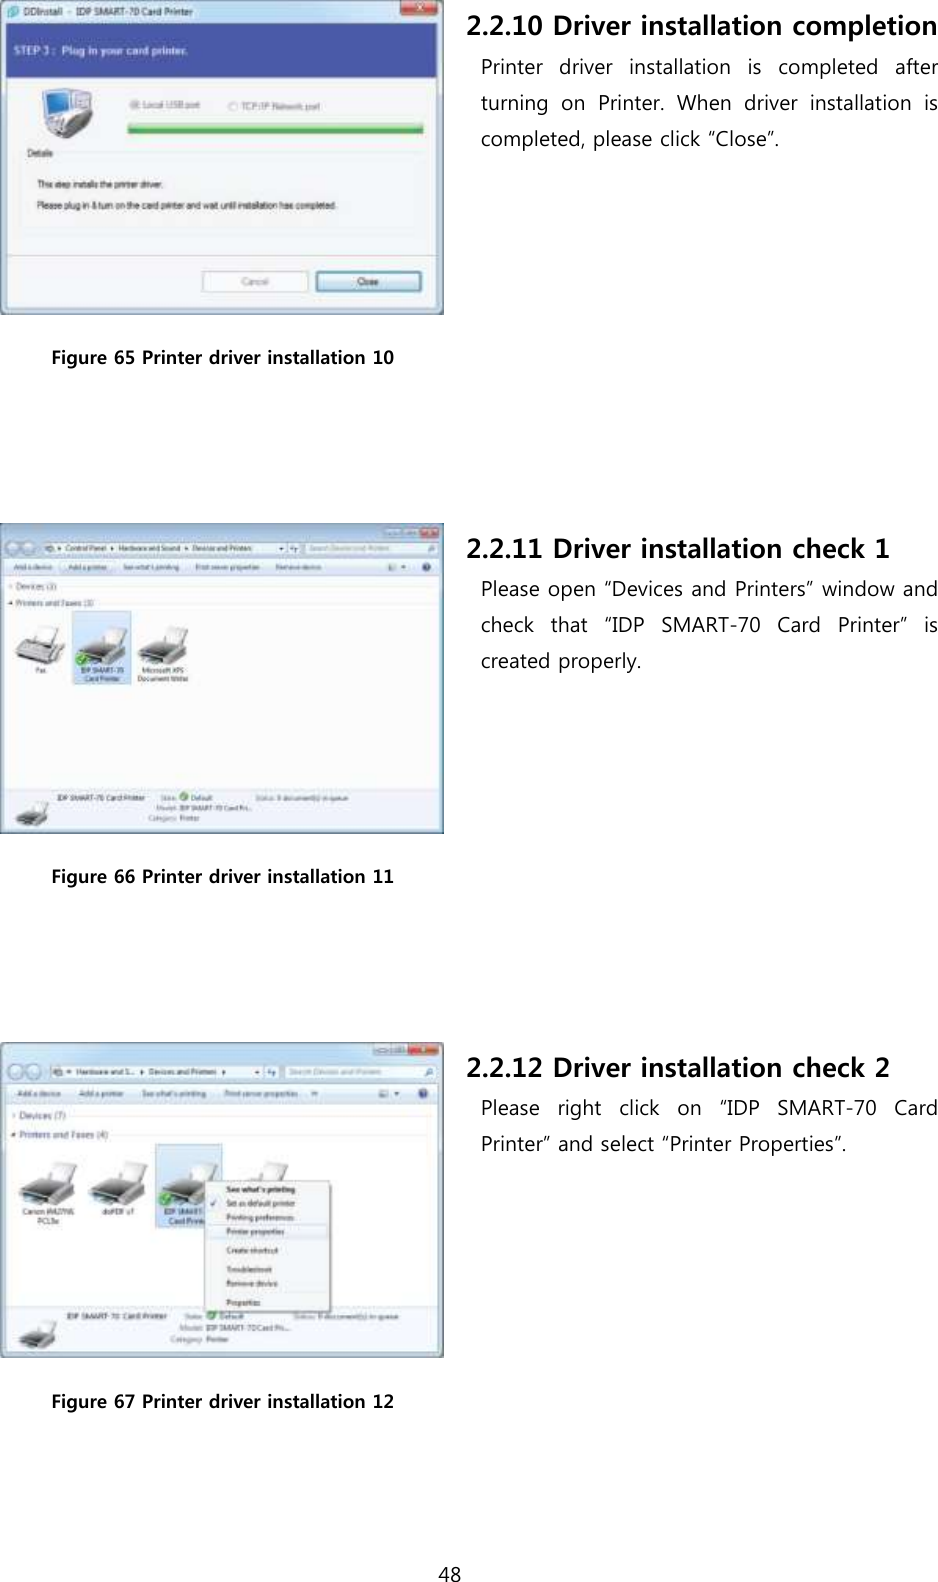 48   Figure 65 Printer driver installation 10   2.2.10 Driver installation completion Printer  driver  installation  is  completed  after turning  on  Printer.  When  driver  installation  is completed, please click “Close”.  Figure 66 Printer driver installation 11   2.2.11 Driver installation check 1 Please open “Devices and Printers” window and check  that  “IDP  SMART-70  Card  Printer”  is created properly.  Figure 67 Printer driver installation 12 2.2.12 Driver installation check 2 Please  right  click  on  “IDP  SMART-70  Card Printer” and select “Printer Properties”. 